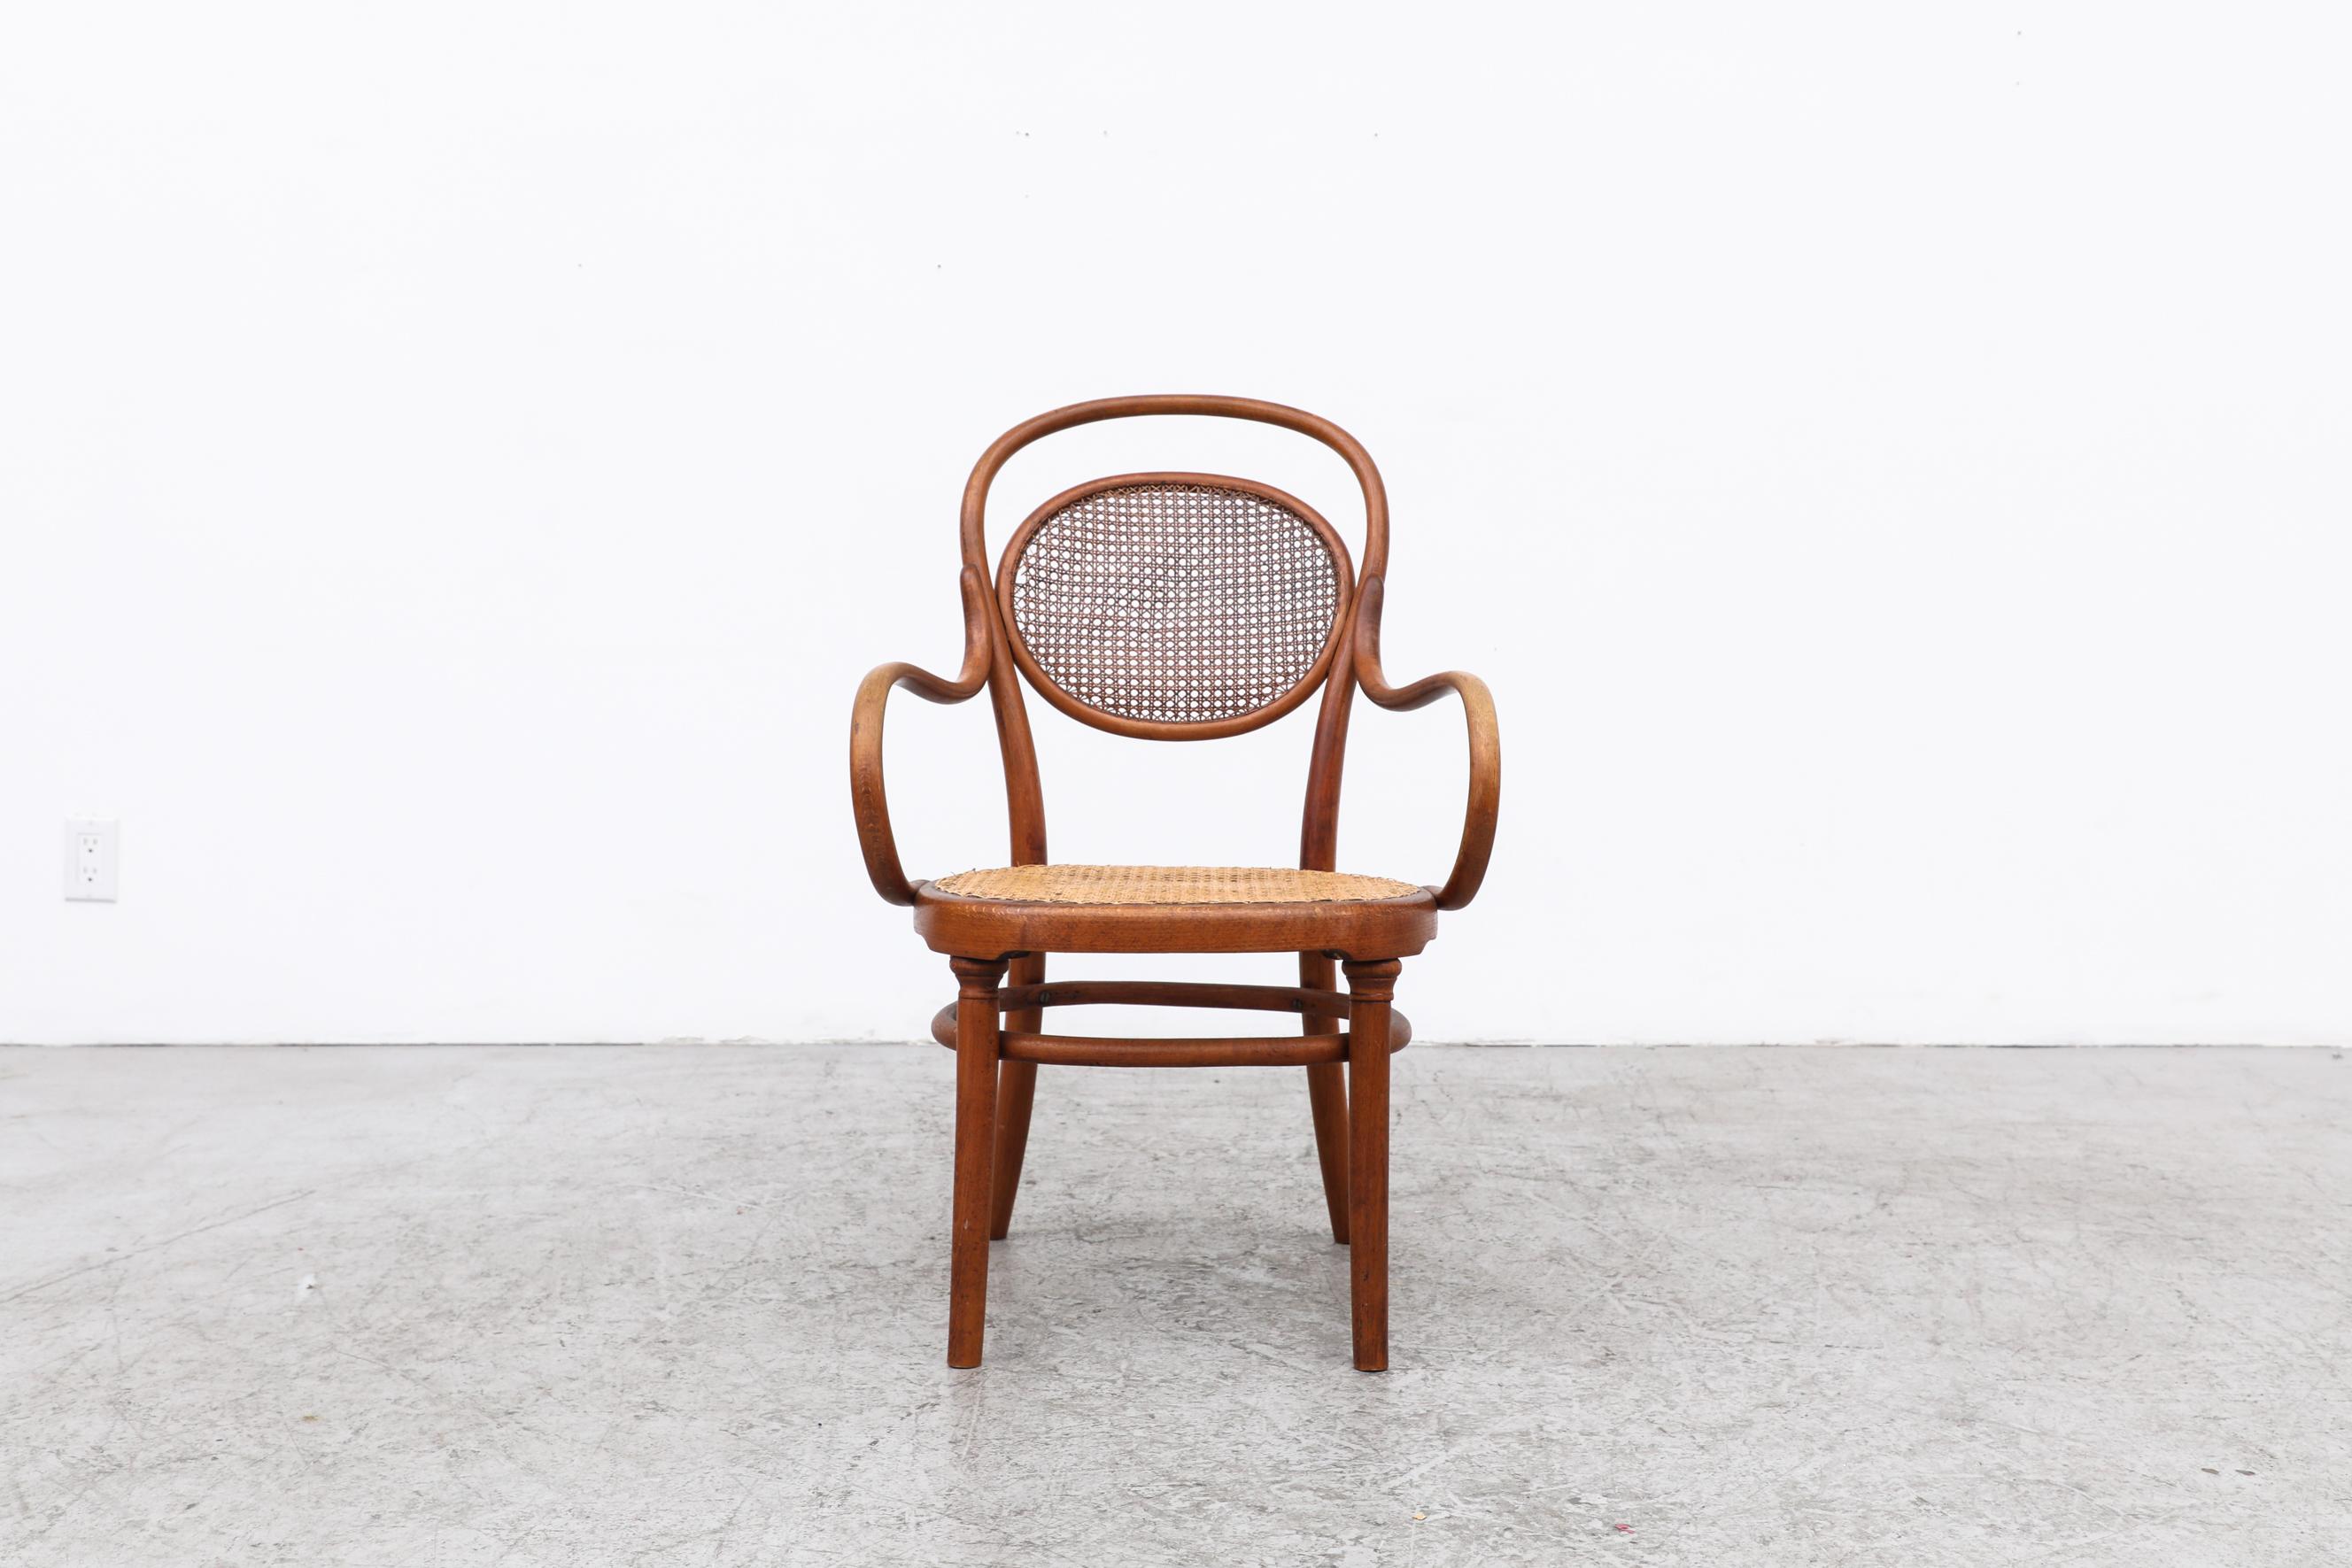 Rare and antique Thonet armchair with cane seating and bentwood armrests. This chair is at least 104 years old and was made between 1891 and 1919. It is in original condition with some visible patina and wear including loose and fraying cane on the